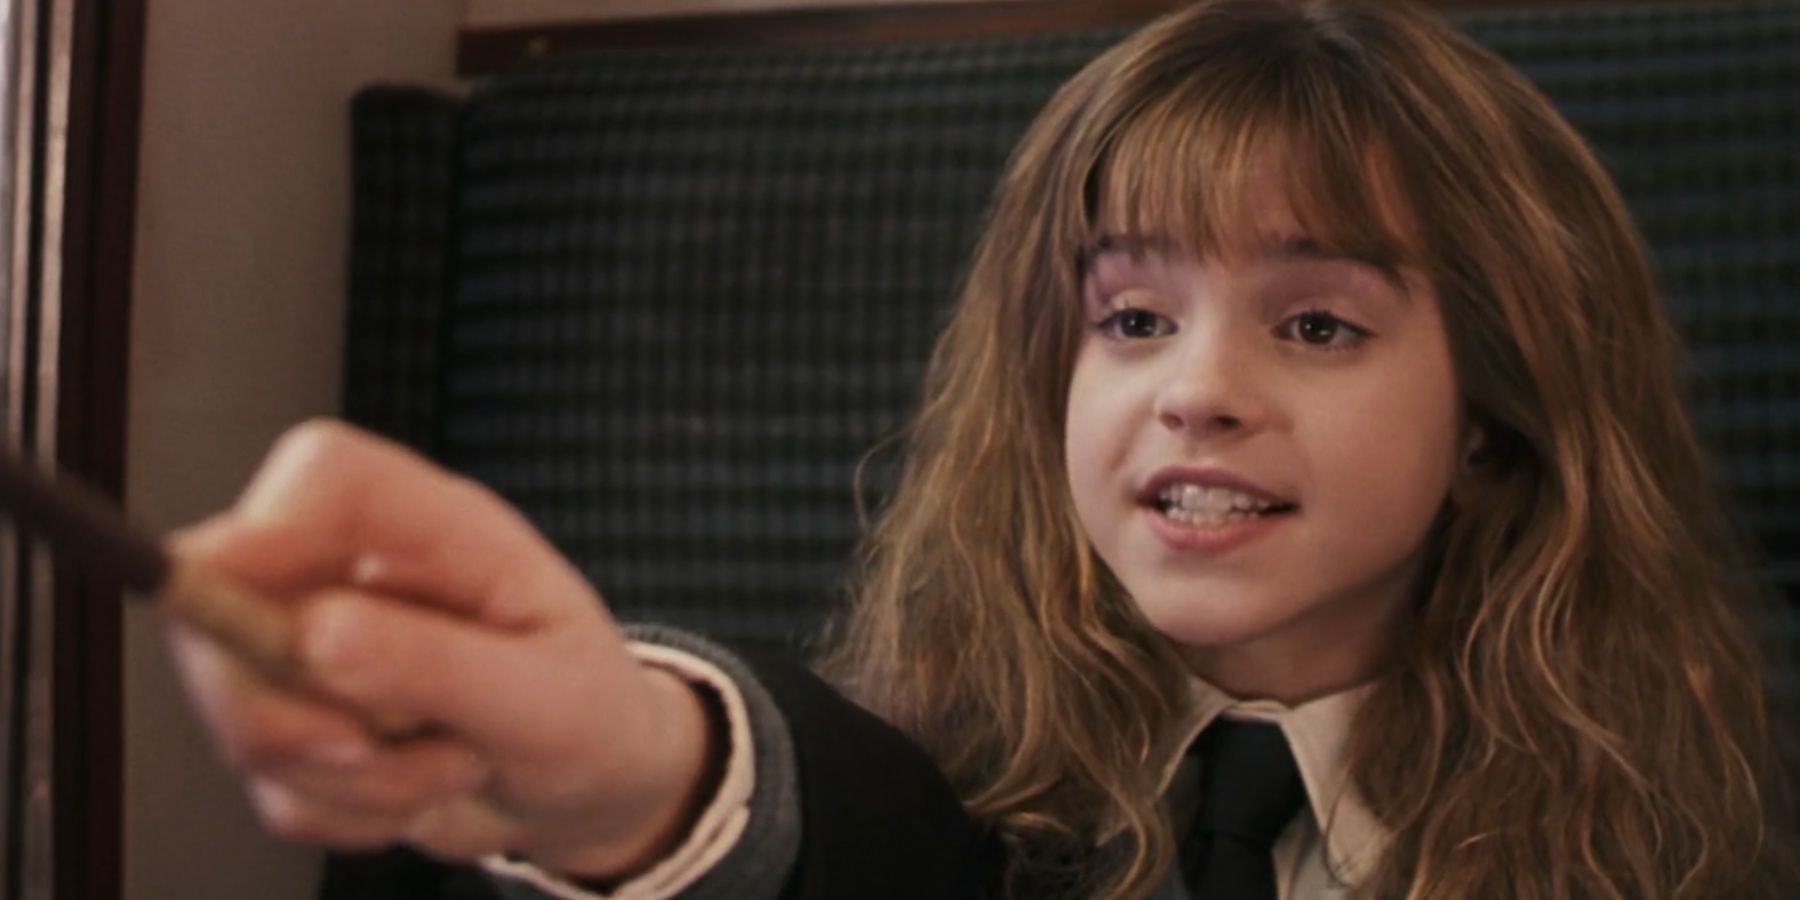 Hermione Granger using her wand in Harry Potter.